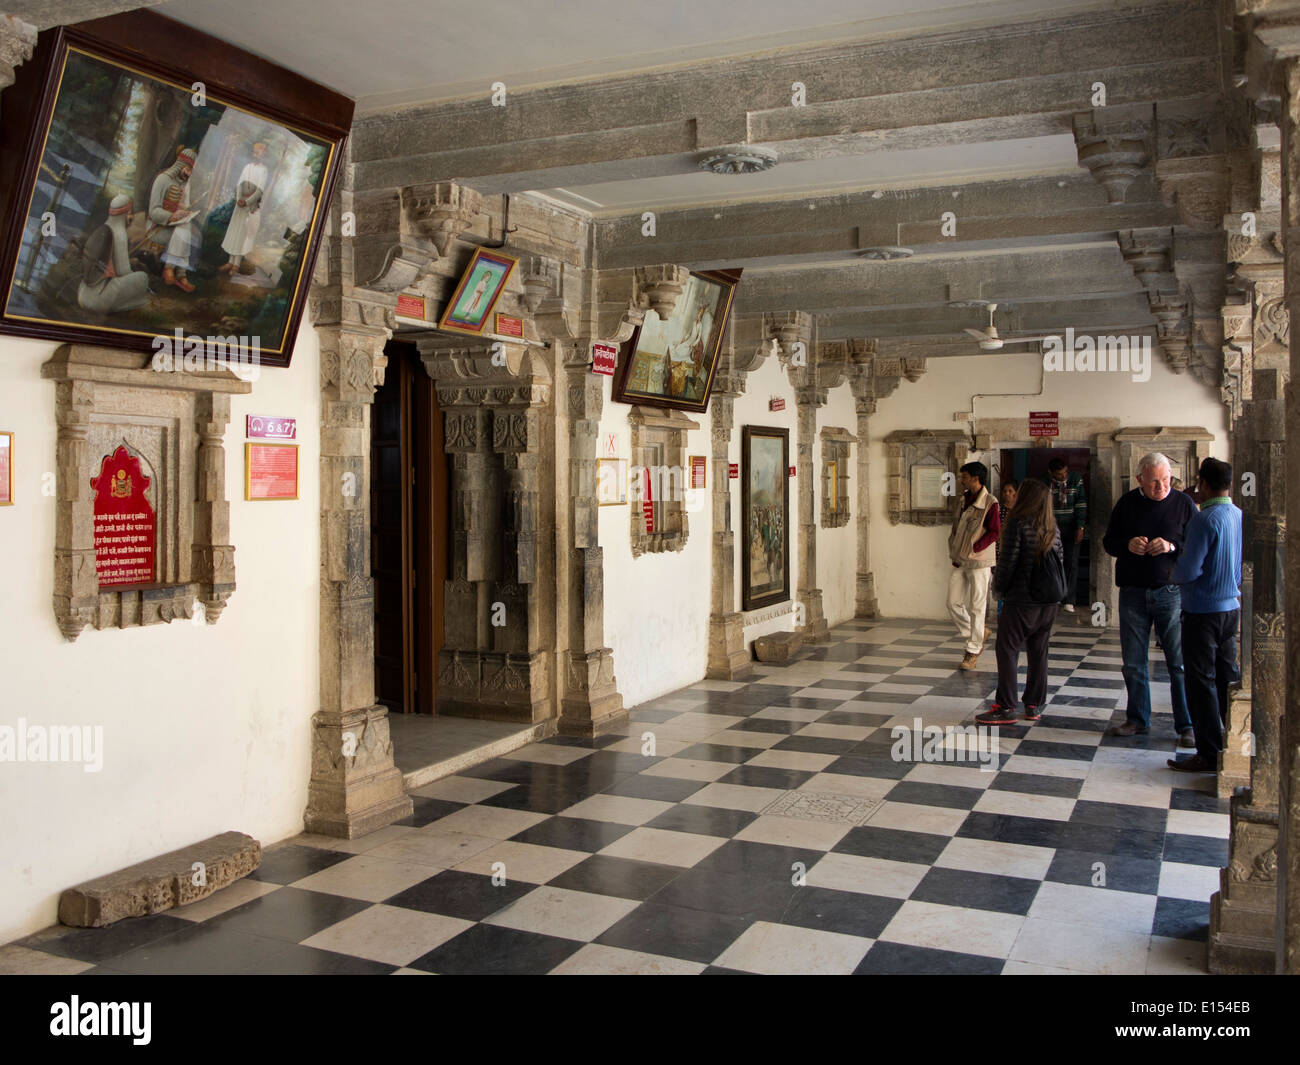 India, Rajasthan, Udaipur, City Palace museum tour, visitors in upper floor gallery Stock Photo